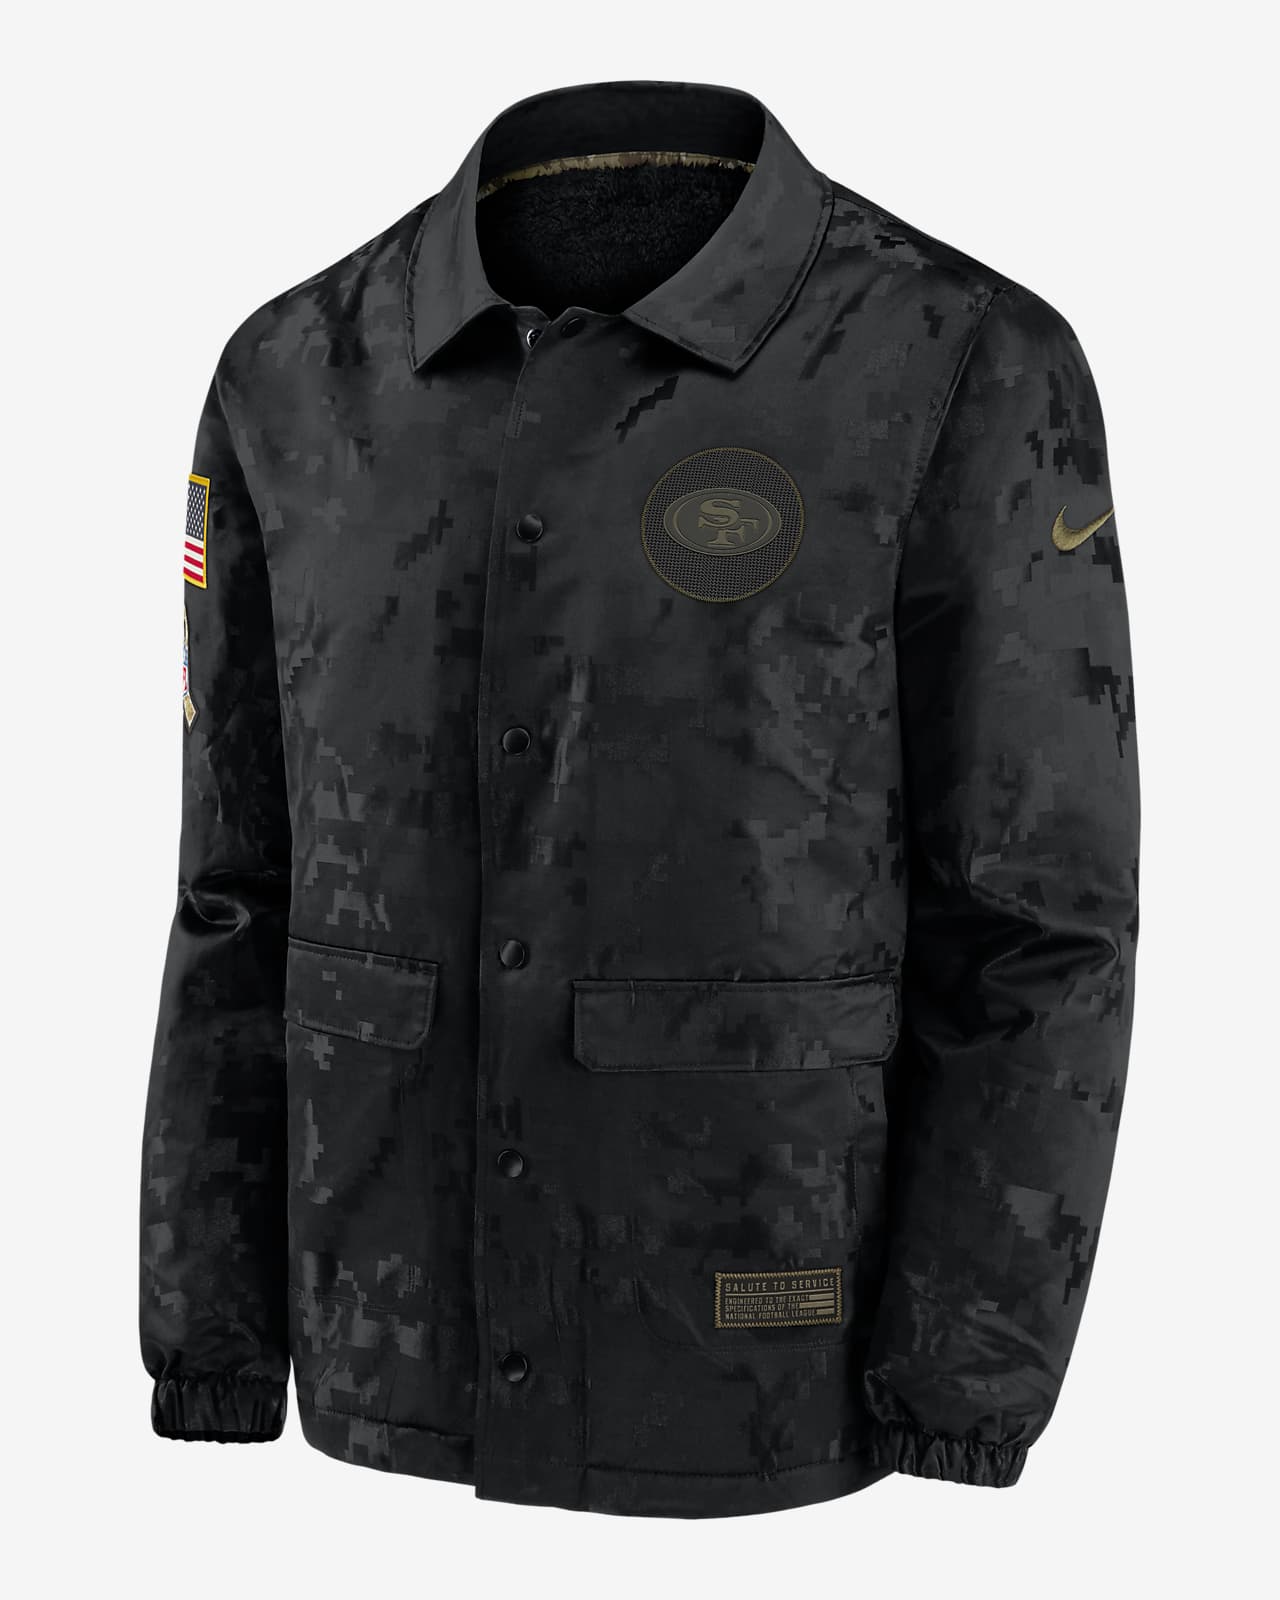 salute to service 49ers jacket